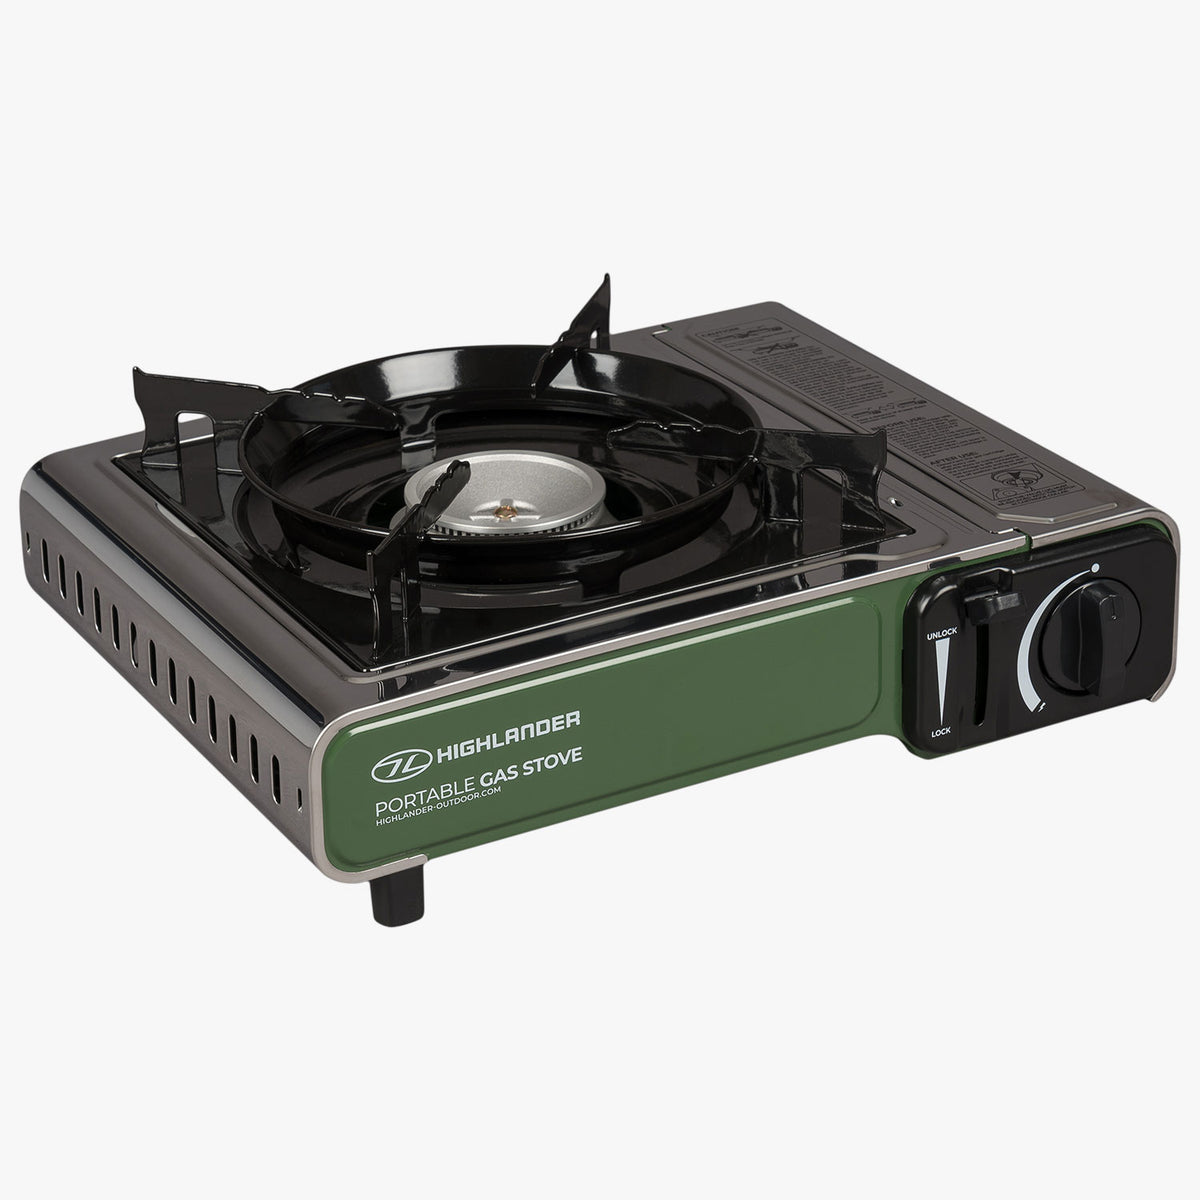 Portable Gas Stove, Shop Today. Get it Tomorrow!